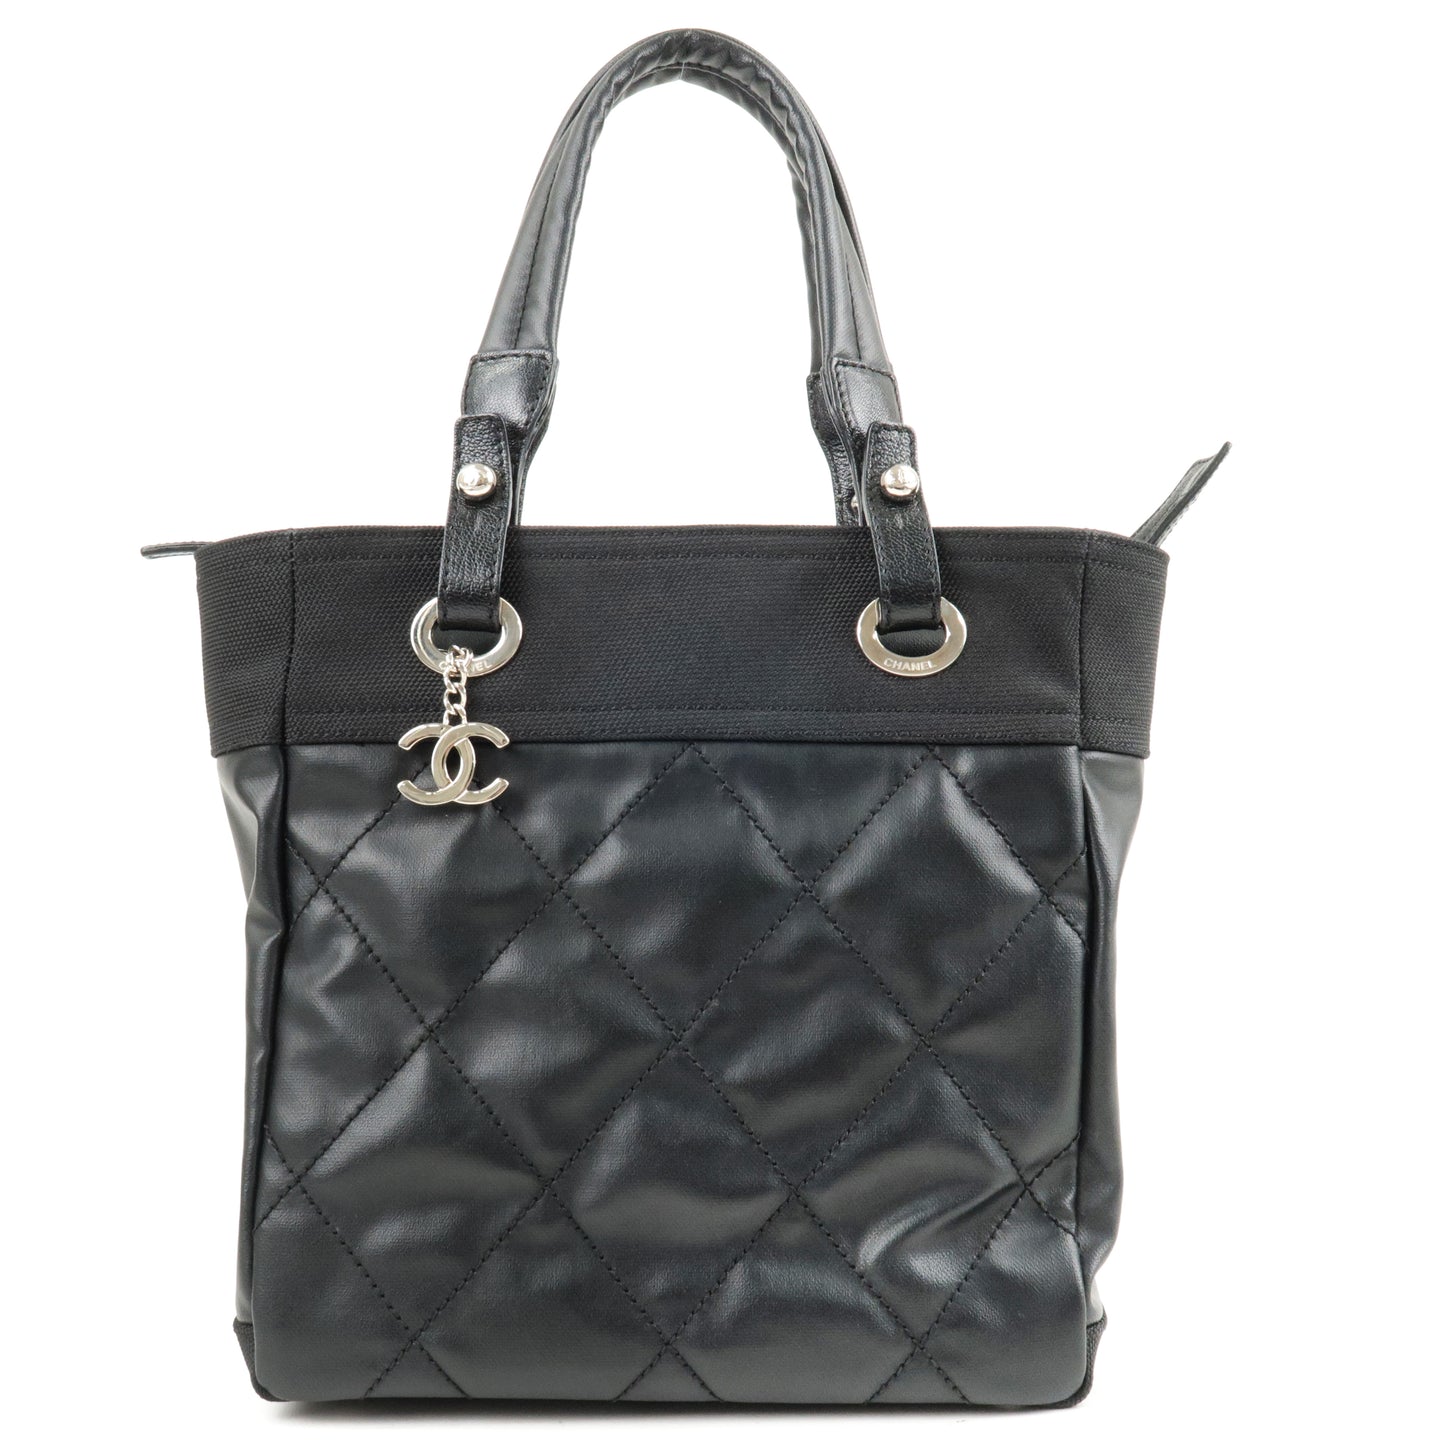 CHANEL-Paris-Biarritz-PM-Coated-Canvas-Leather-Tote-Bag-A34208